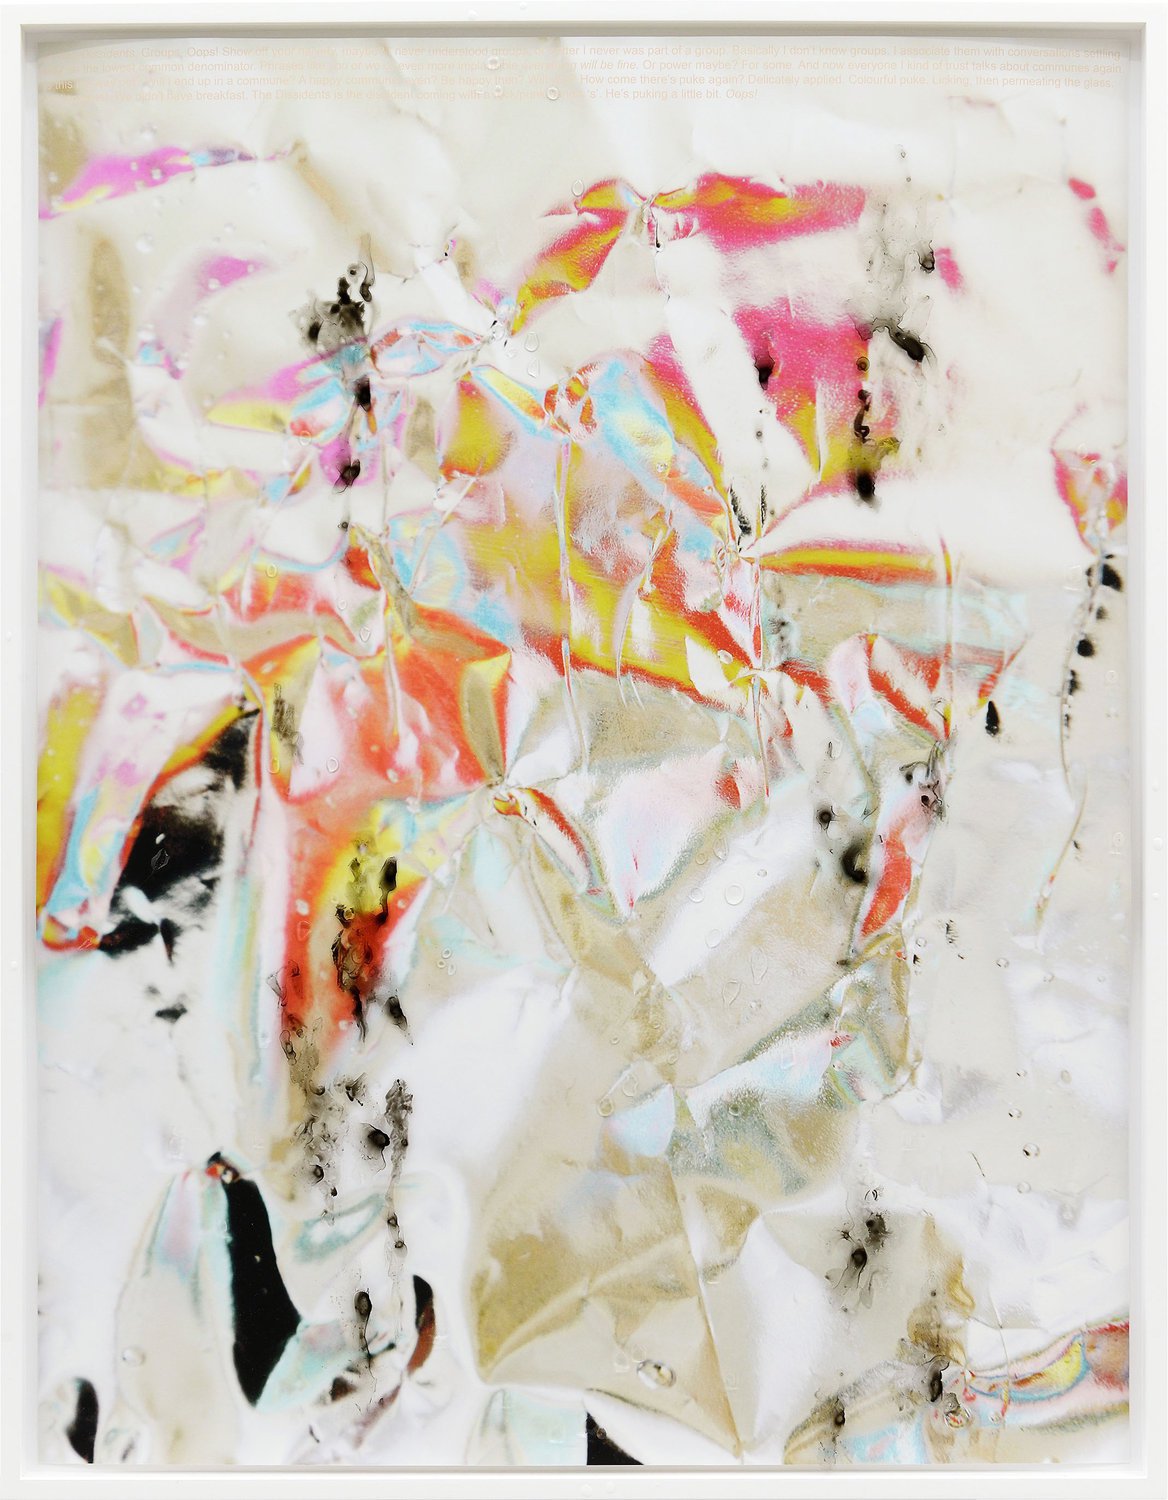 Lisa HolzerThe Dissidents, 2016Pigment print on cotton paper, Crystal Clear 202/1 polyurethane on glass92 x 72 cm